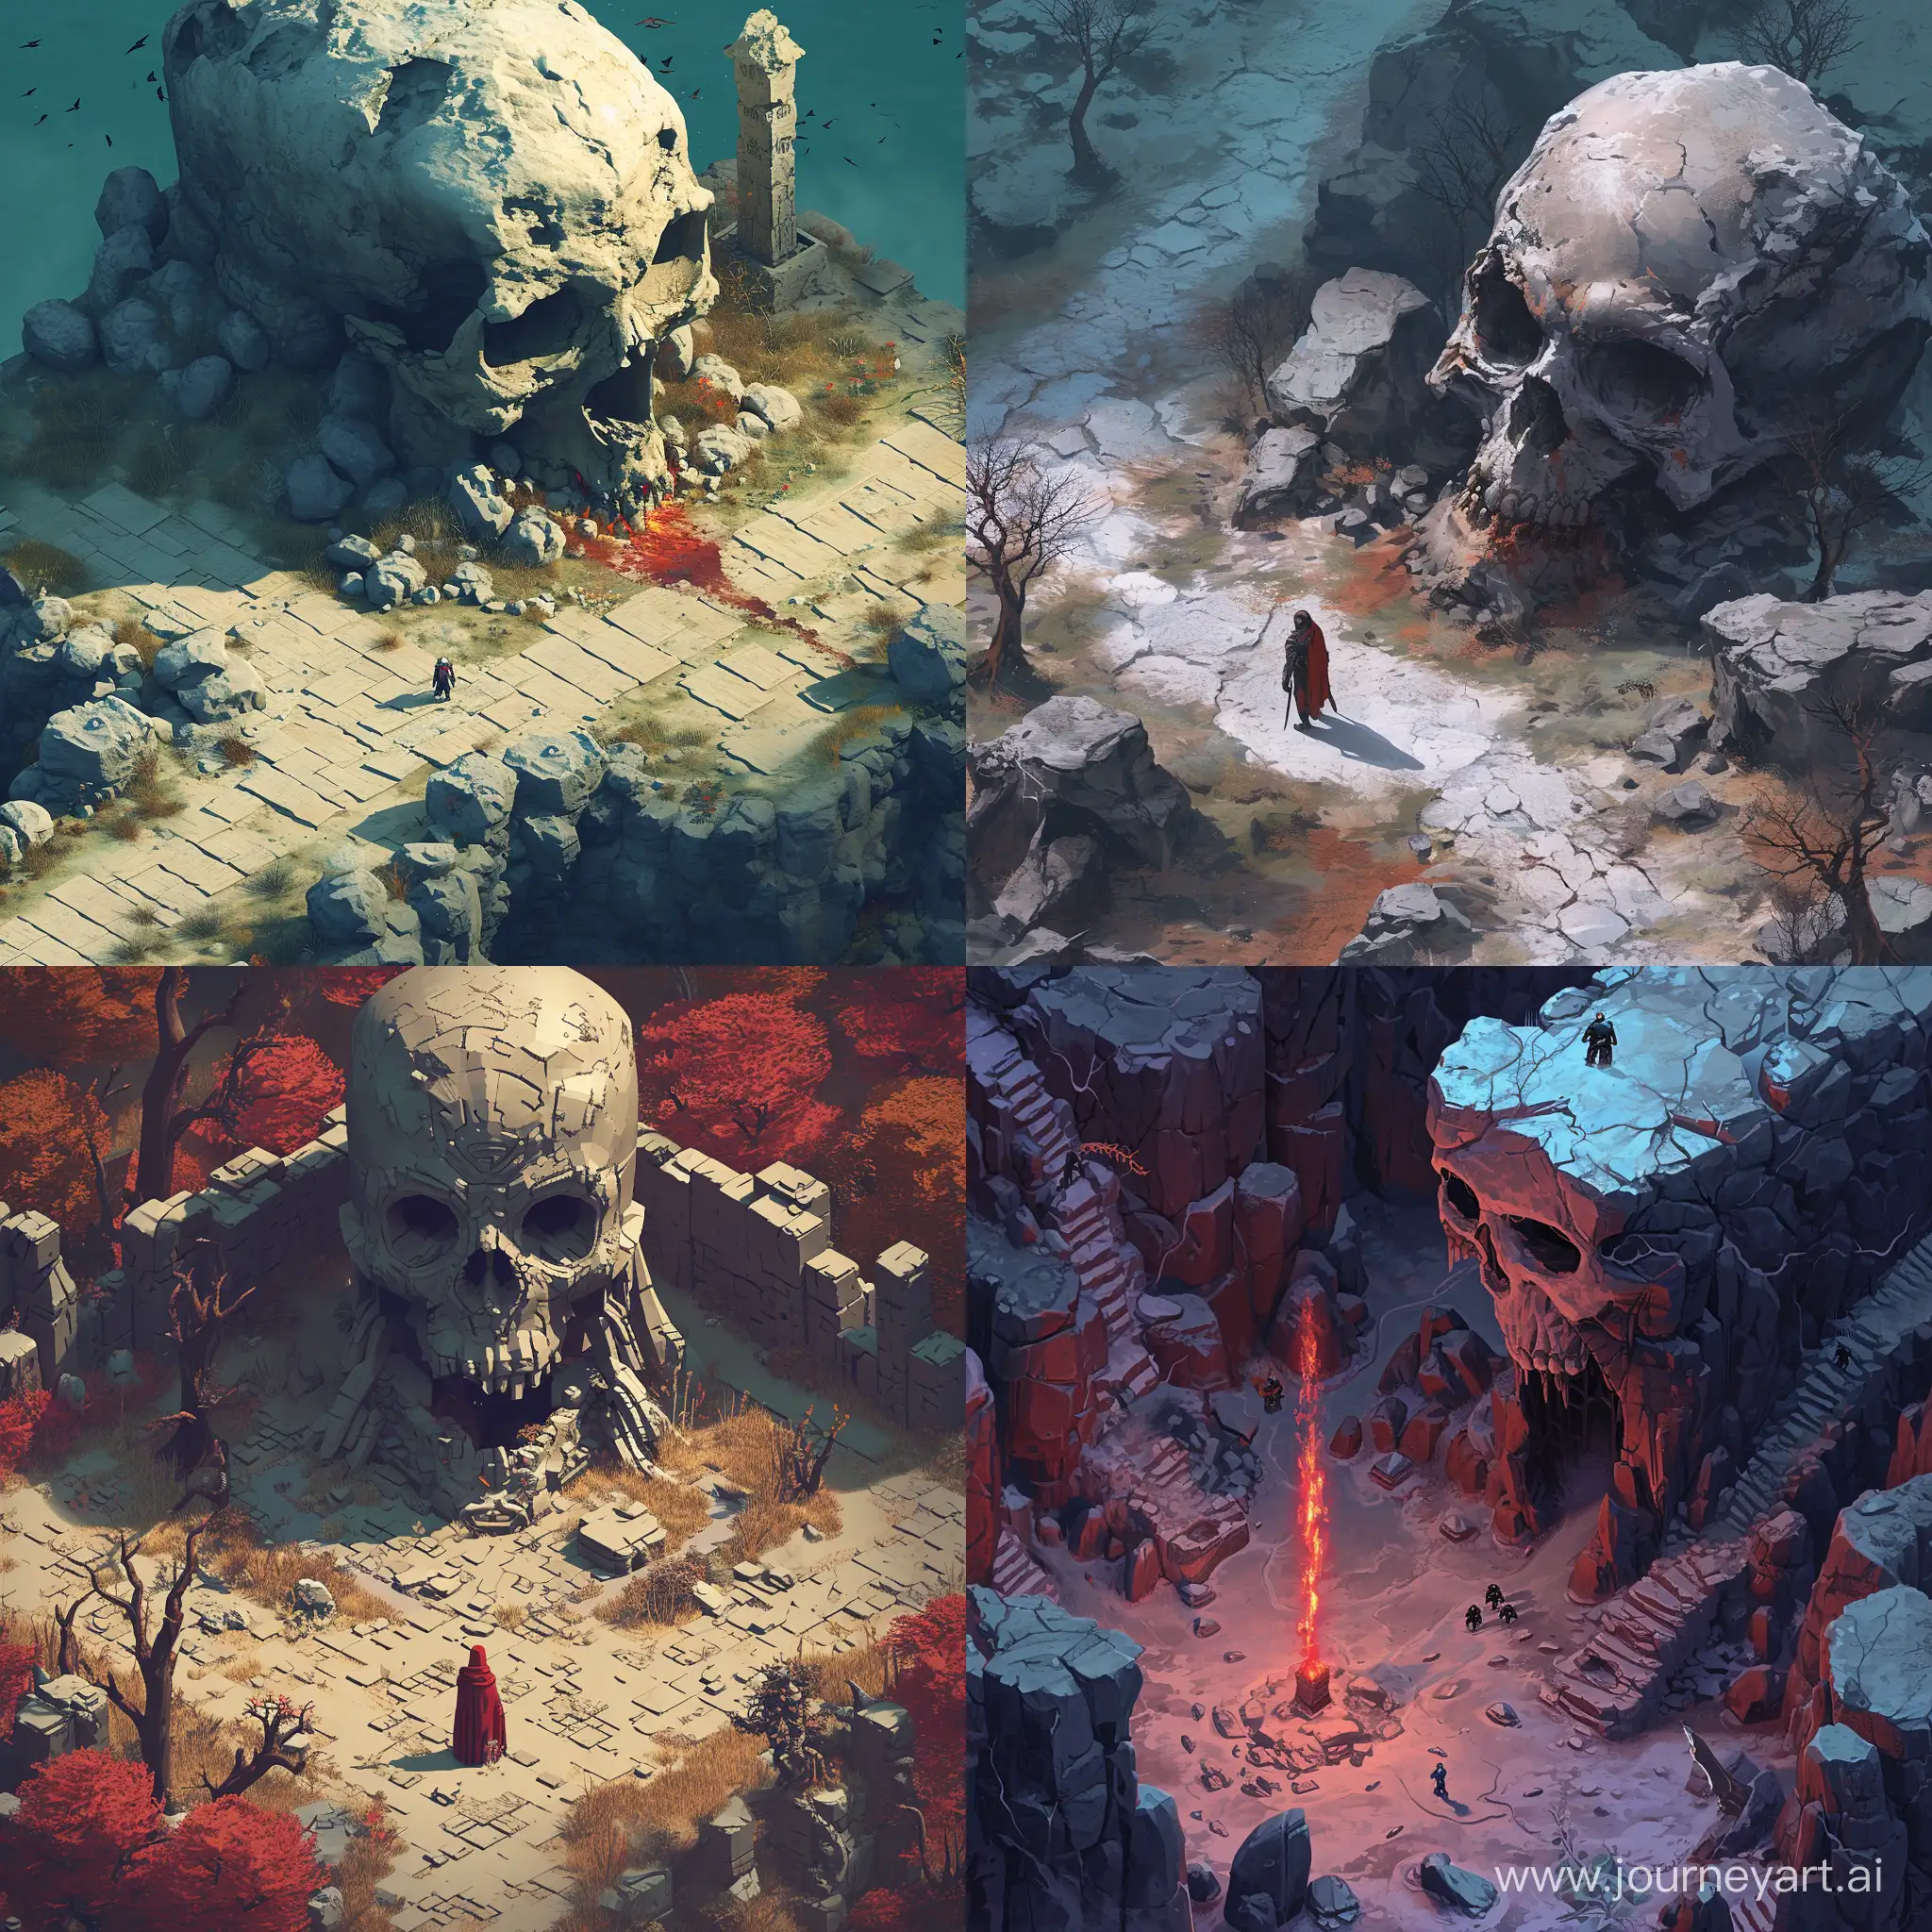 Isometric 8K realism, ::2. a warrior stands in a desolate land with a giant skull looming above them. The warrior is equipped with a sword and shield, there is a skull with glowing eyes in the background. The scene is set at dusk, there are crows flying around. --v 6